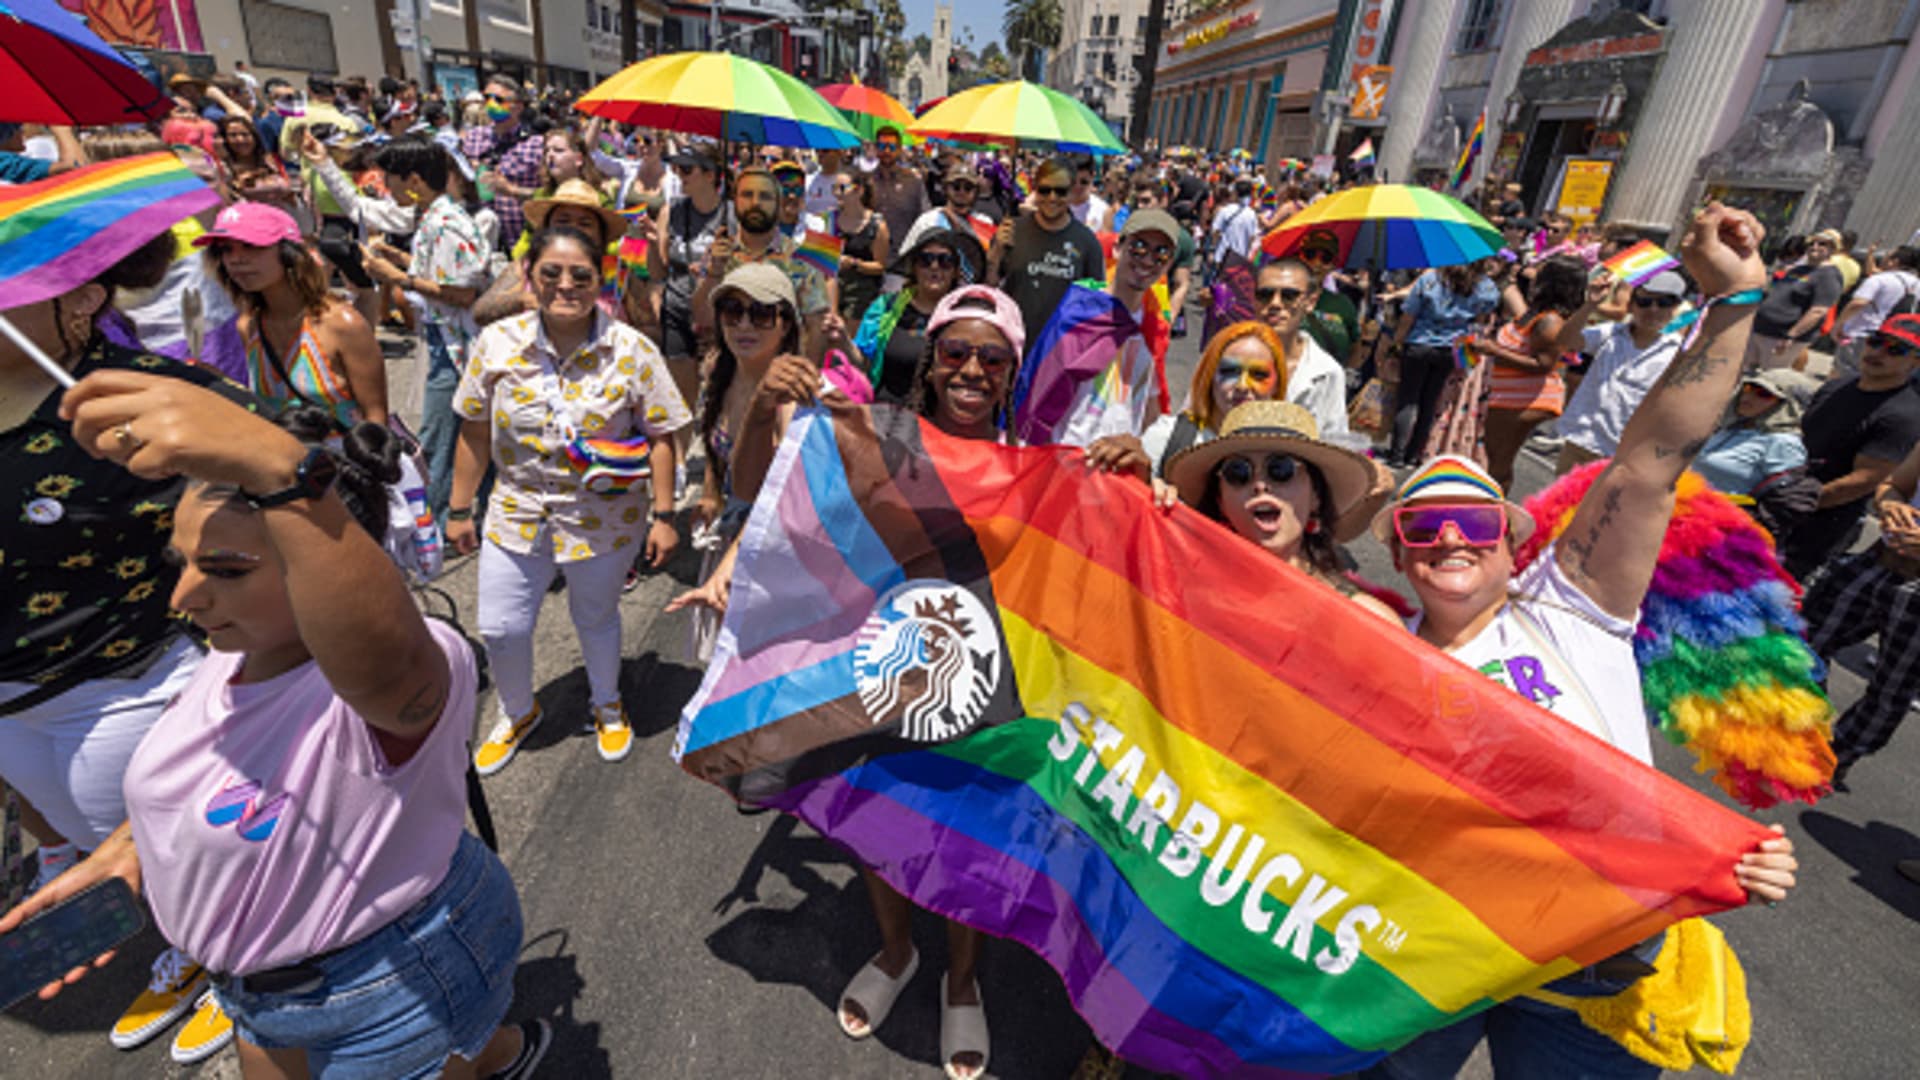 Starbucks union says workers at more than 150 stores will strike over Pride decor